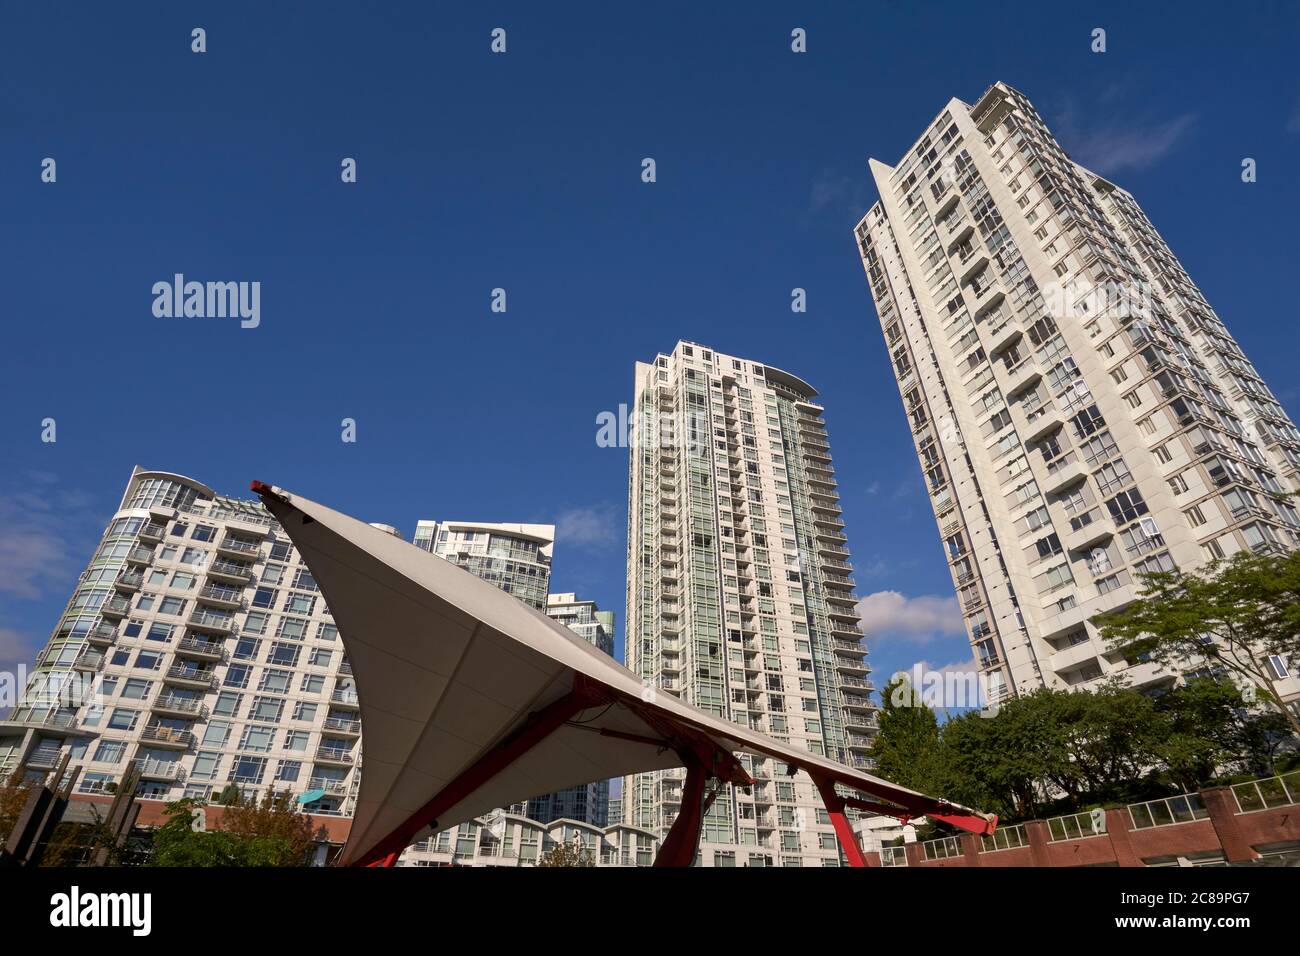 Residential towers and hydraulic crane in the Roundhouse Turntable Plaza in Yaletown, Vancouver, British Columbia, Canada Stock Photo